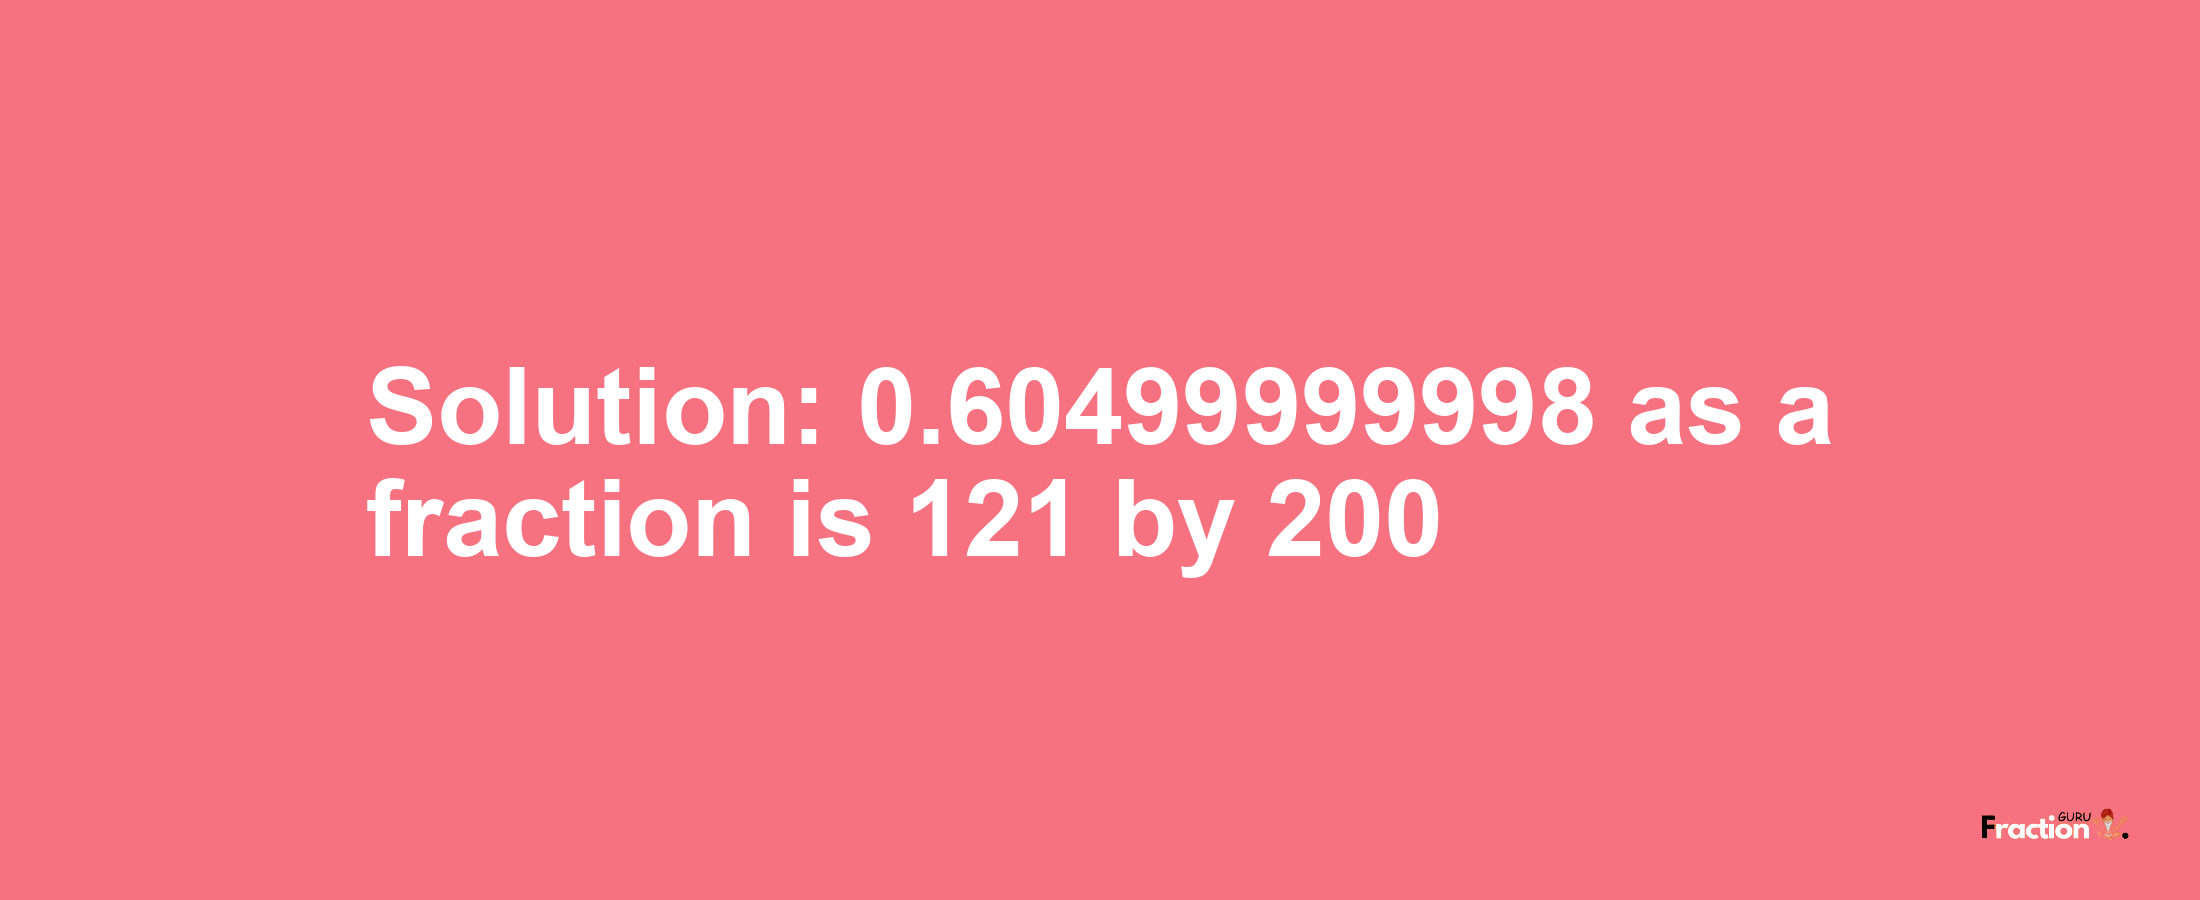 Solution:0.60499999998 as a fraction is 121/200